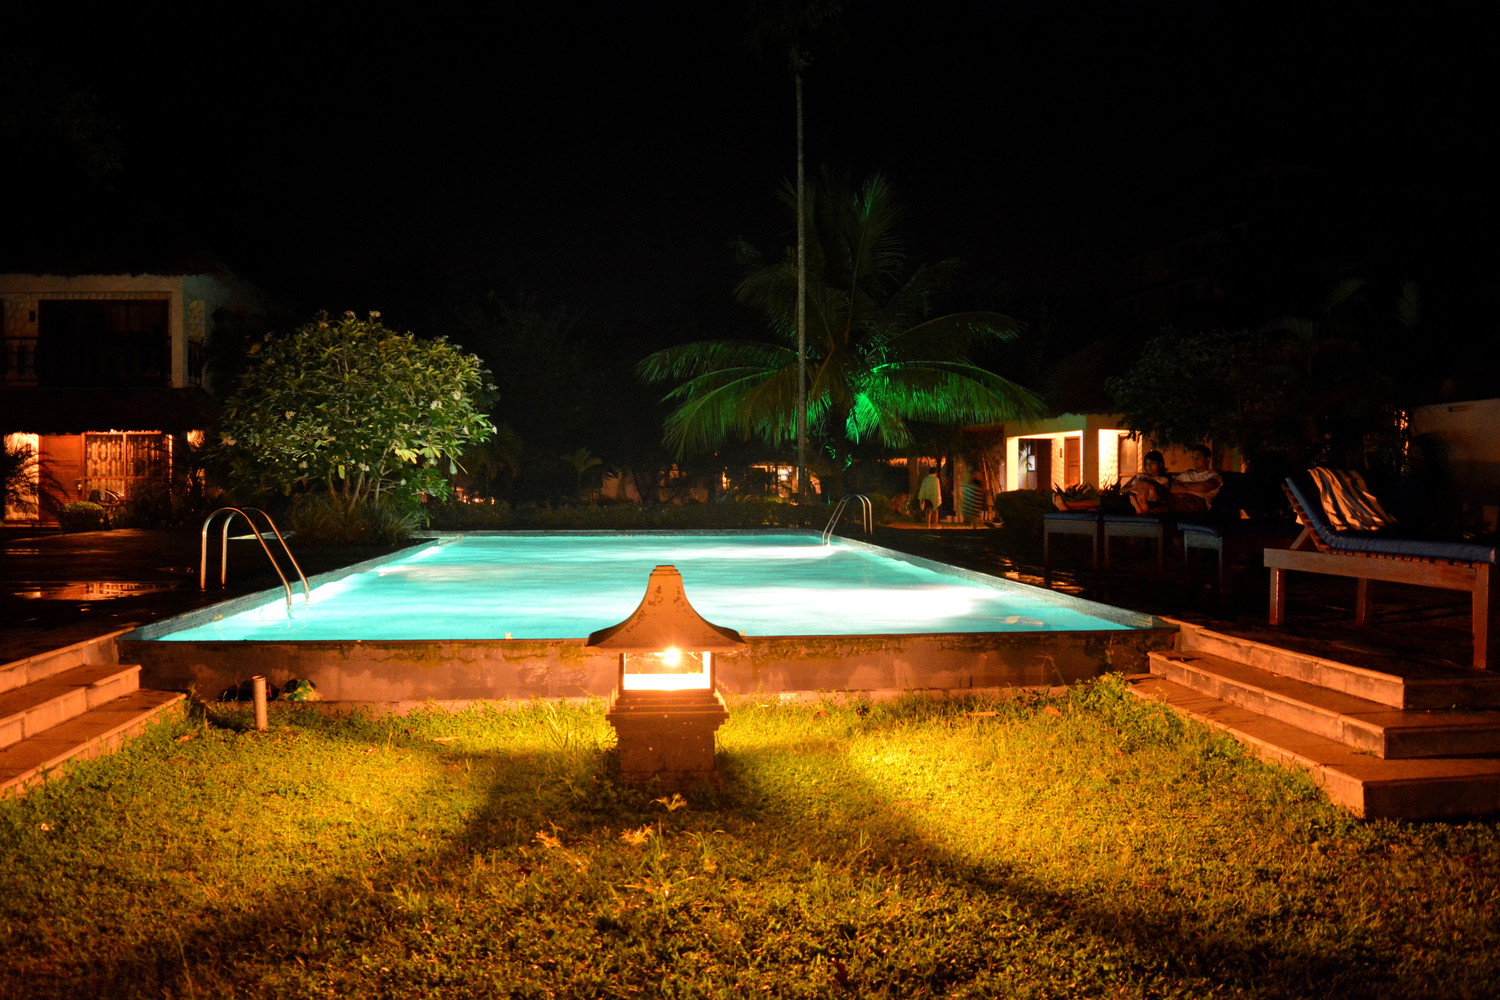 Swimming pool lit with electric lights in the evening